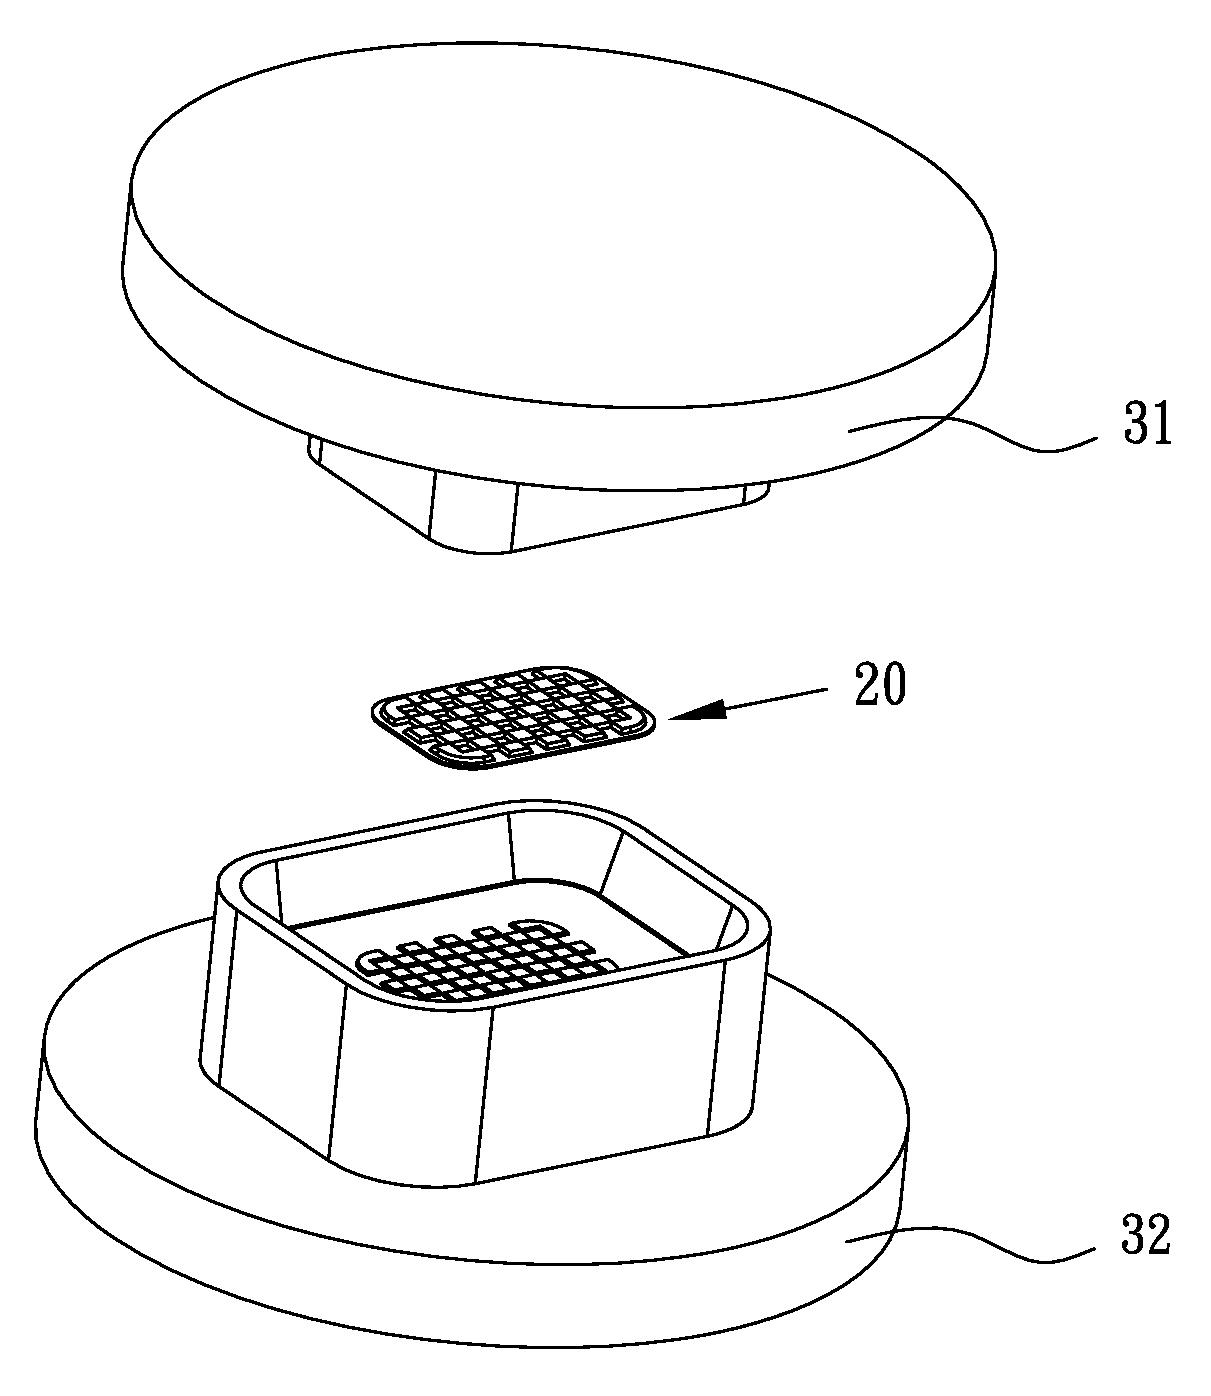 Diaphragm and Electrical-Acoustic Transducer having the same